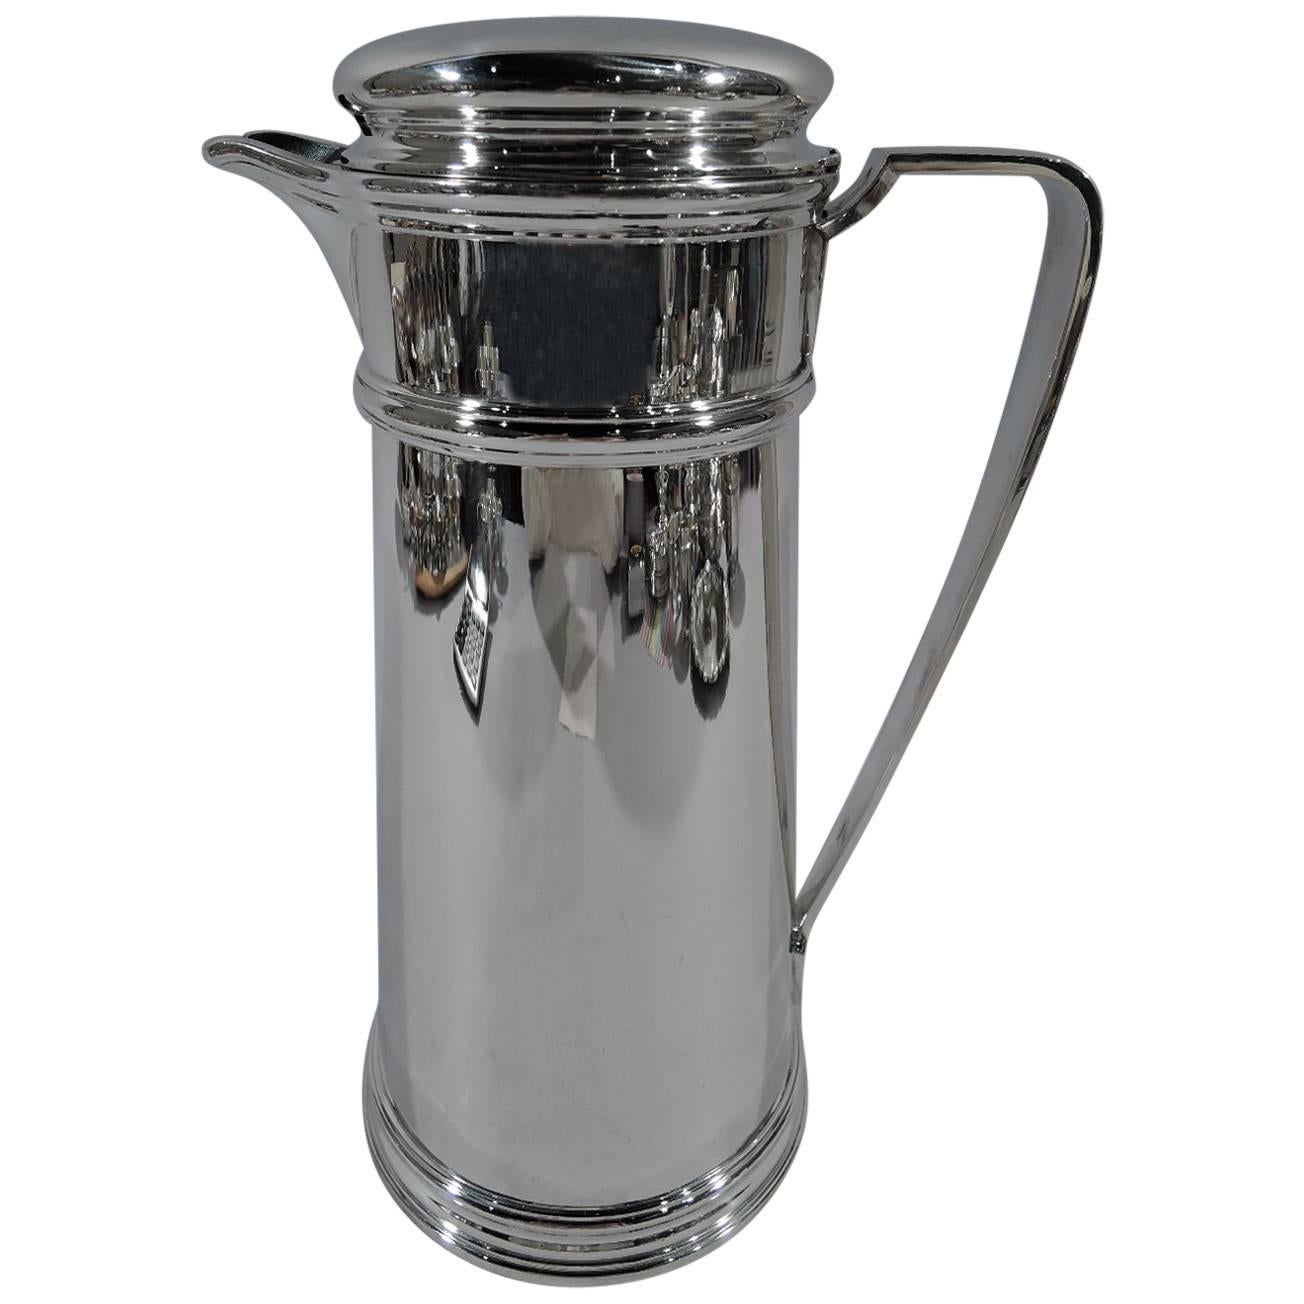 Tiffany Art Deco Sterling Silver Cocktail Shaker